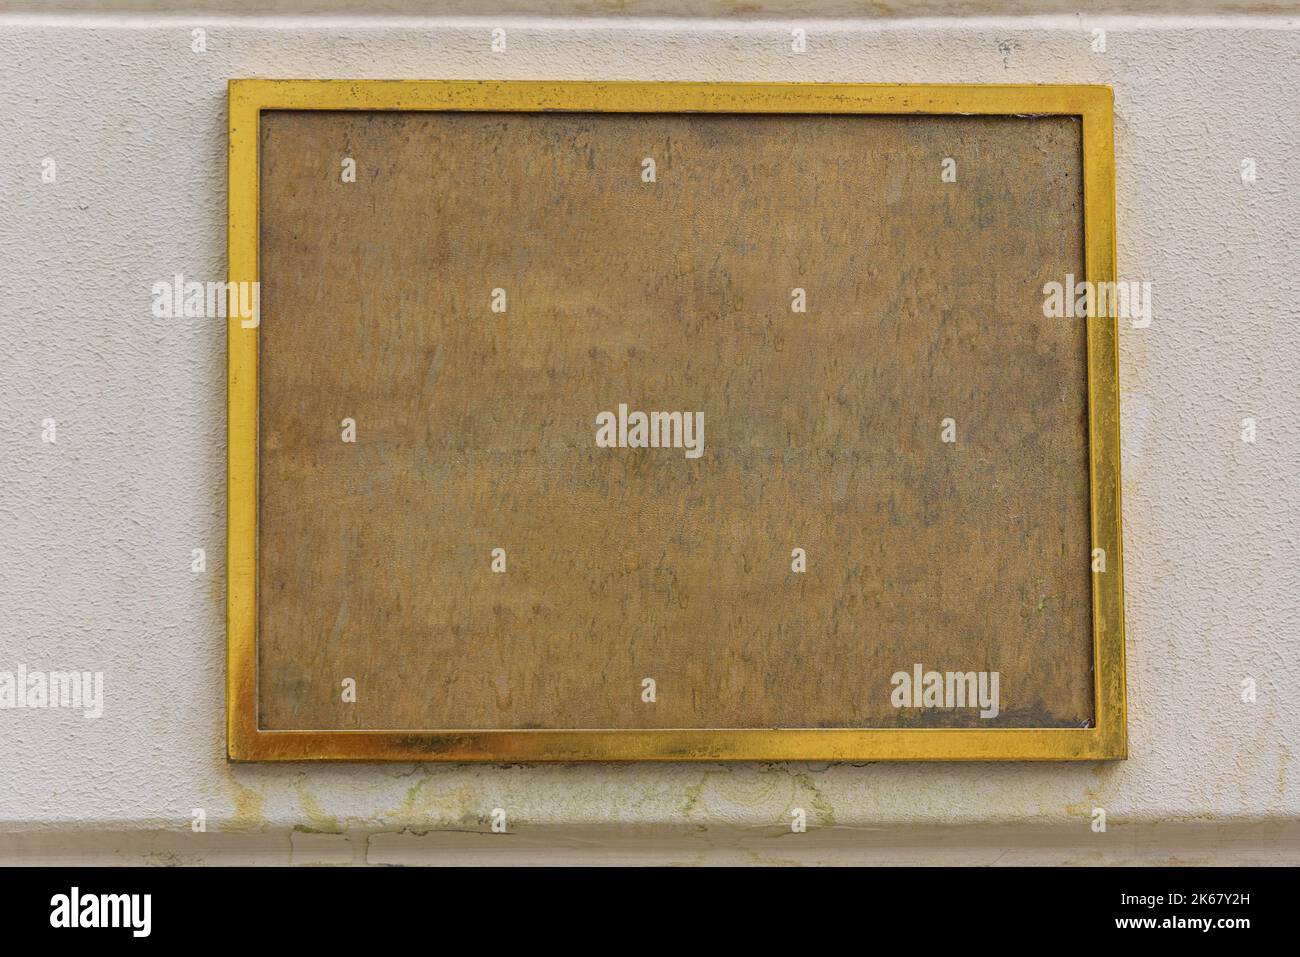 Weathered Brass Plaque Old Golden Frame at Building Wall Stock Photo